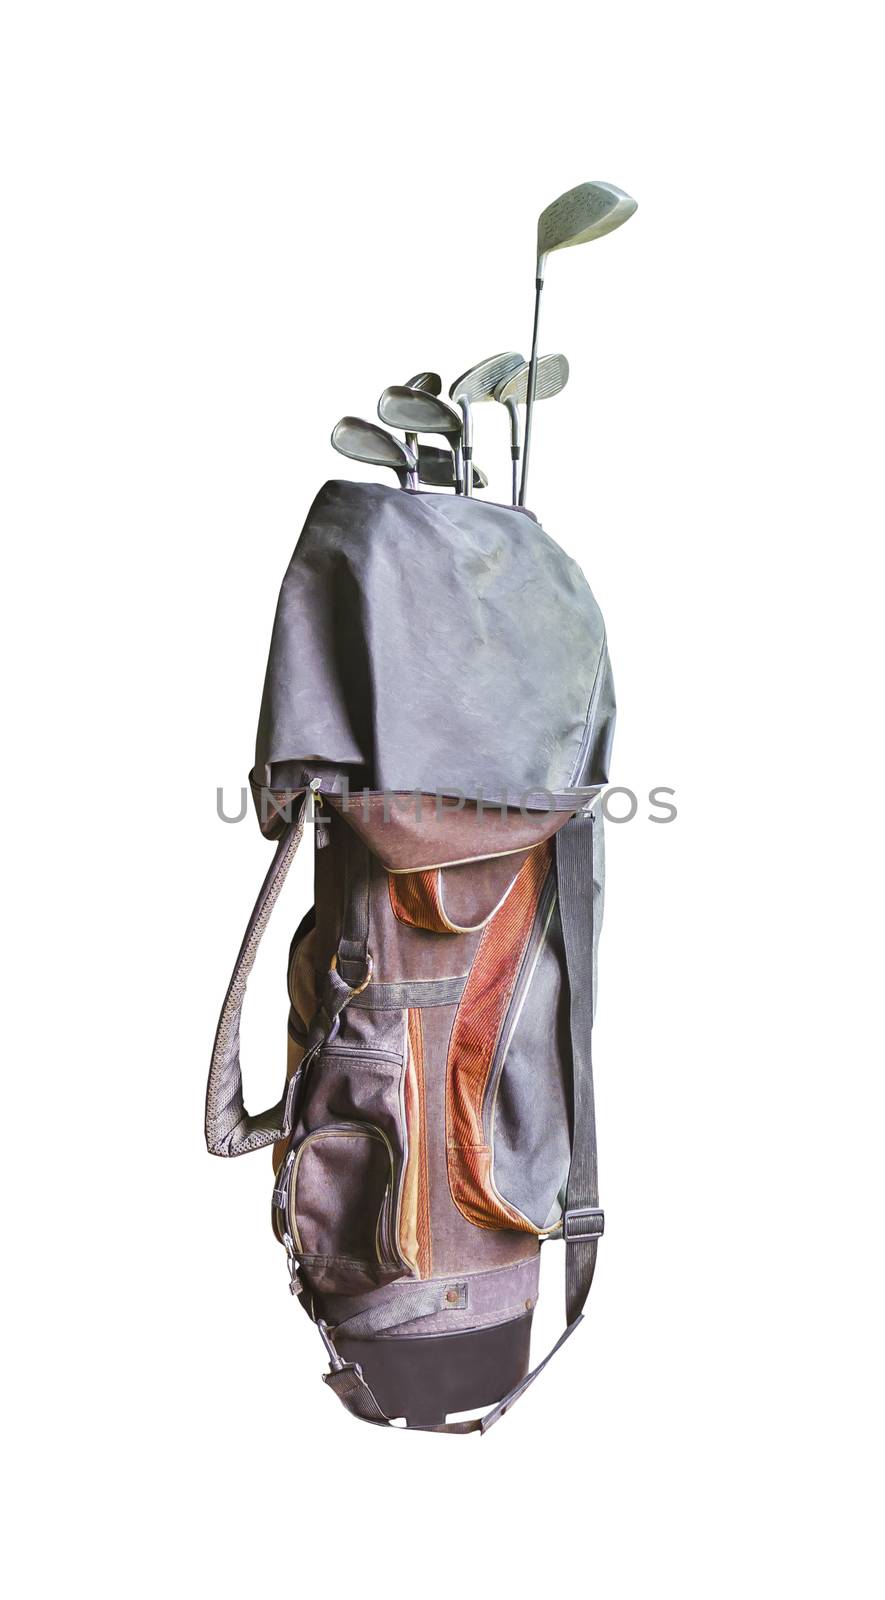 Golf bag isolated on a white background